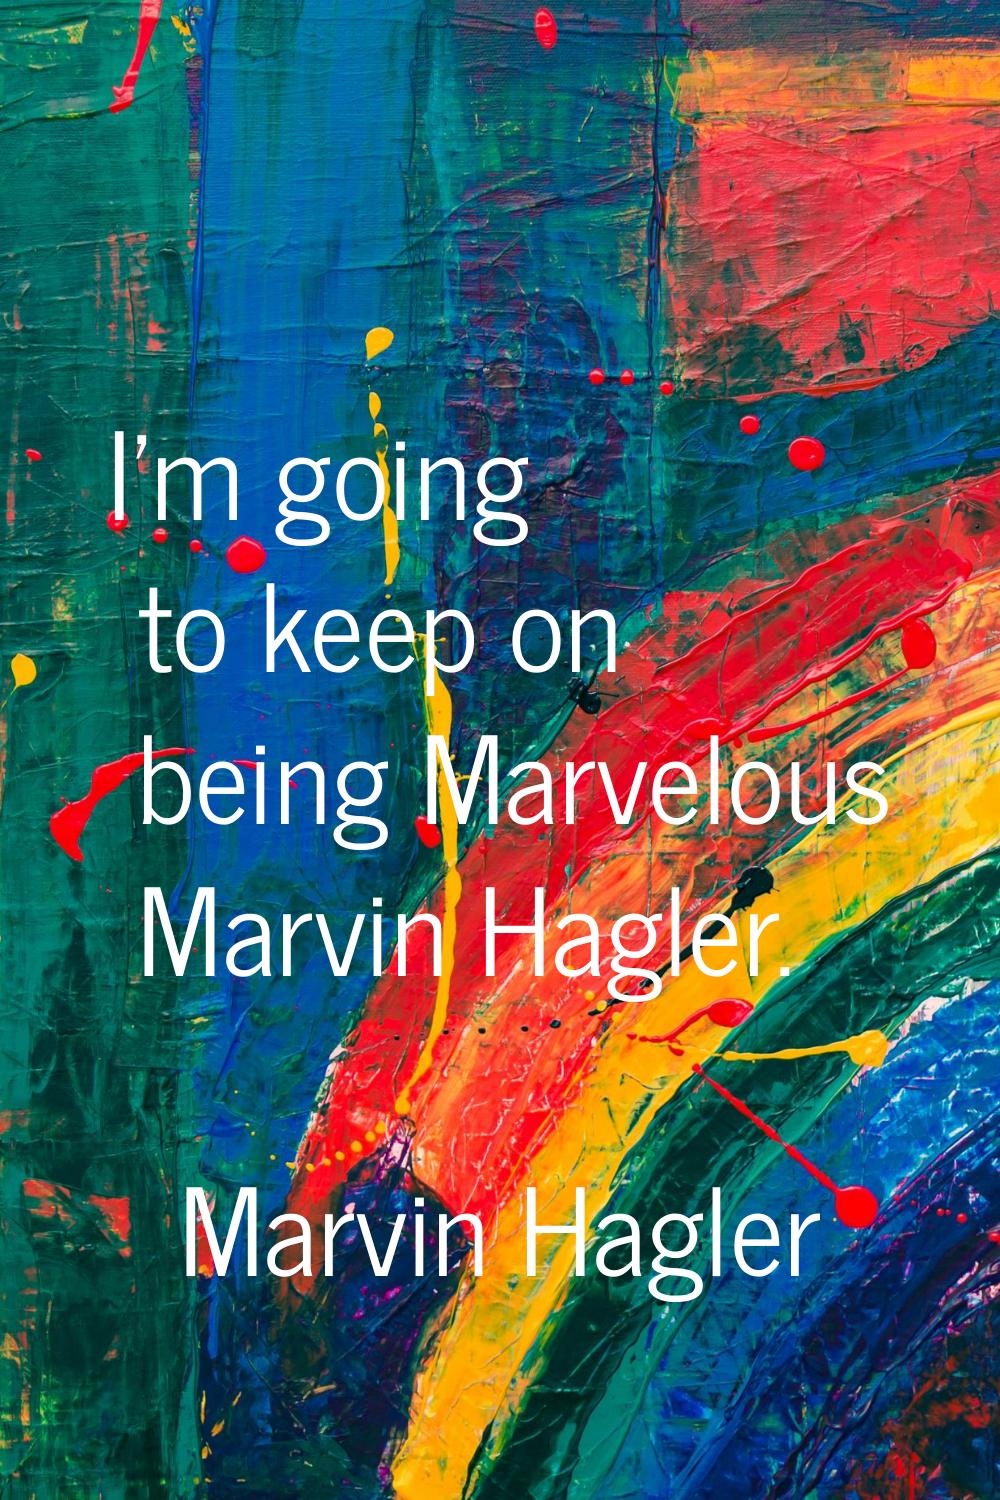 I'm going to keep on being Marvelous Marvin Hagler.